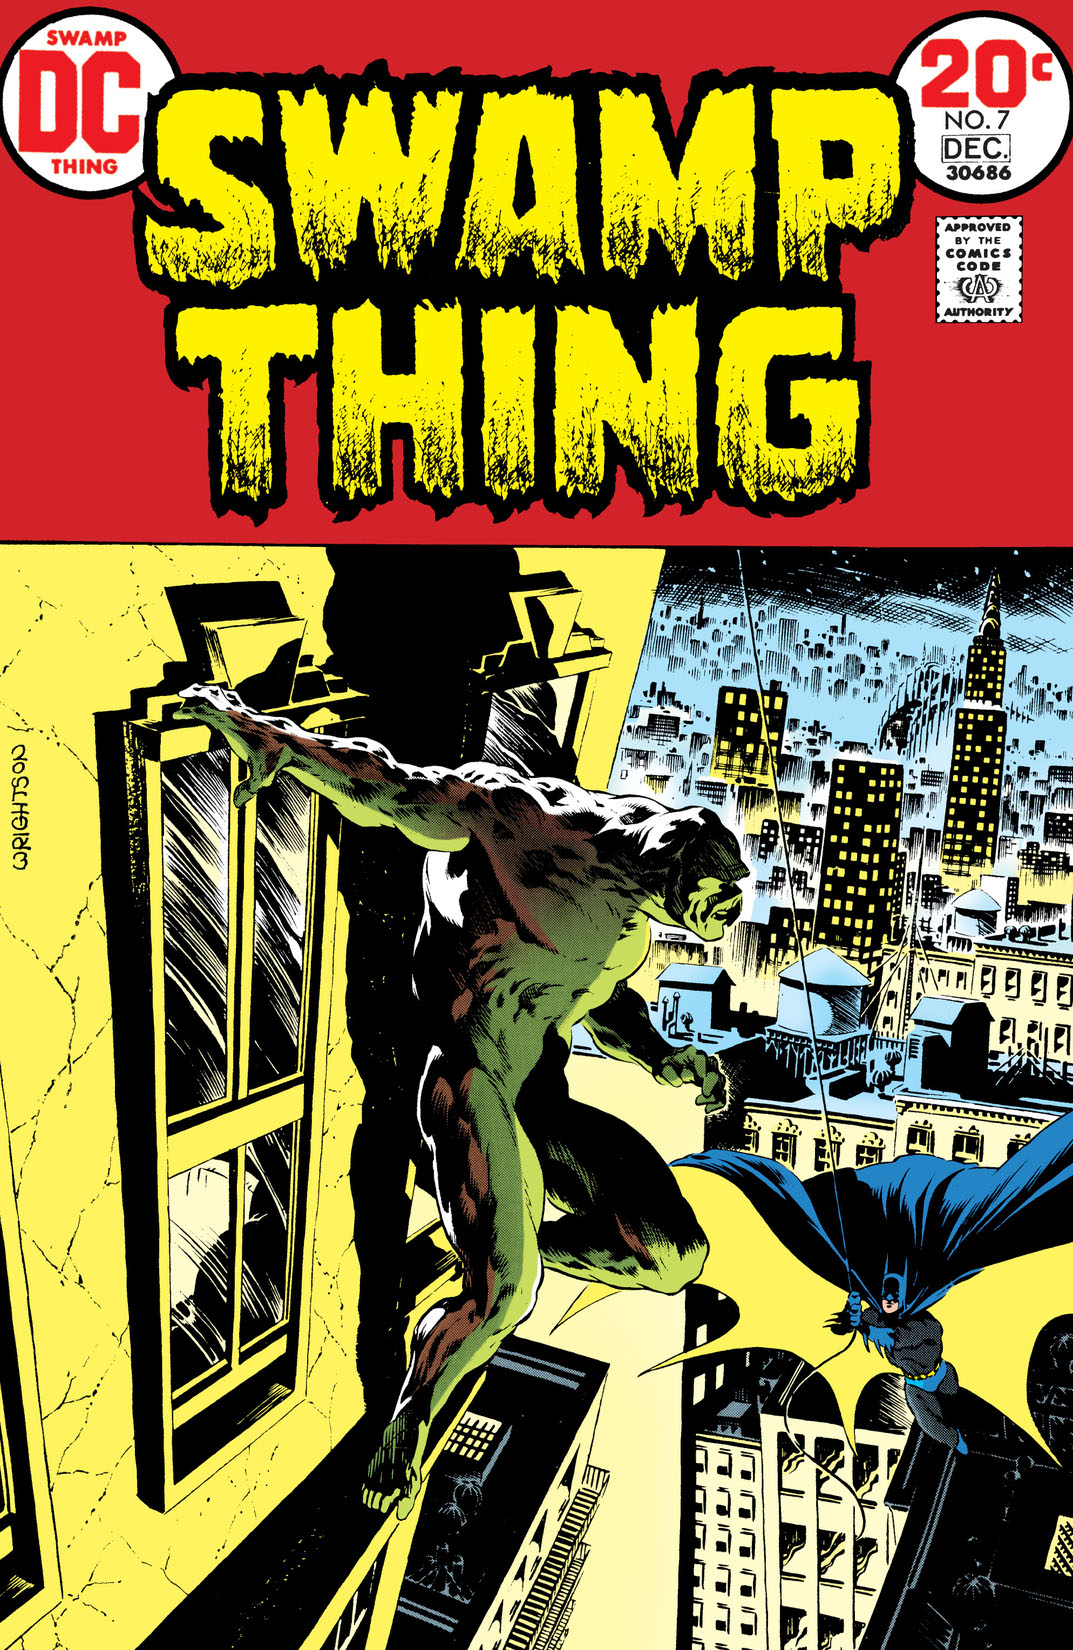 Swamp Thing (1972-) #7 preview images